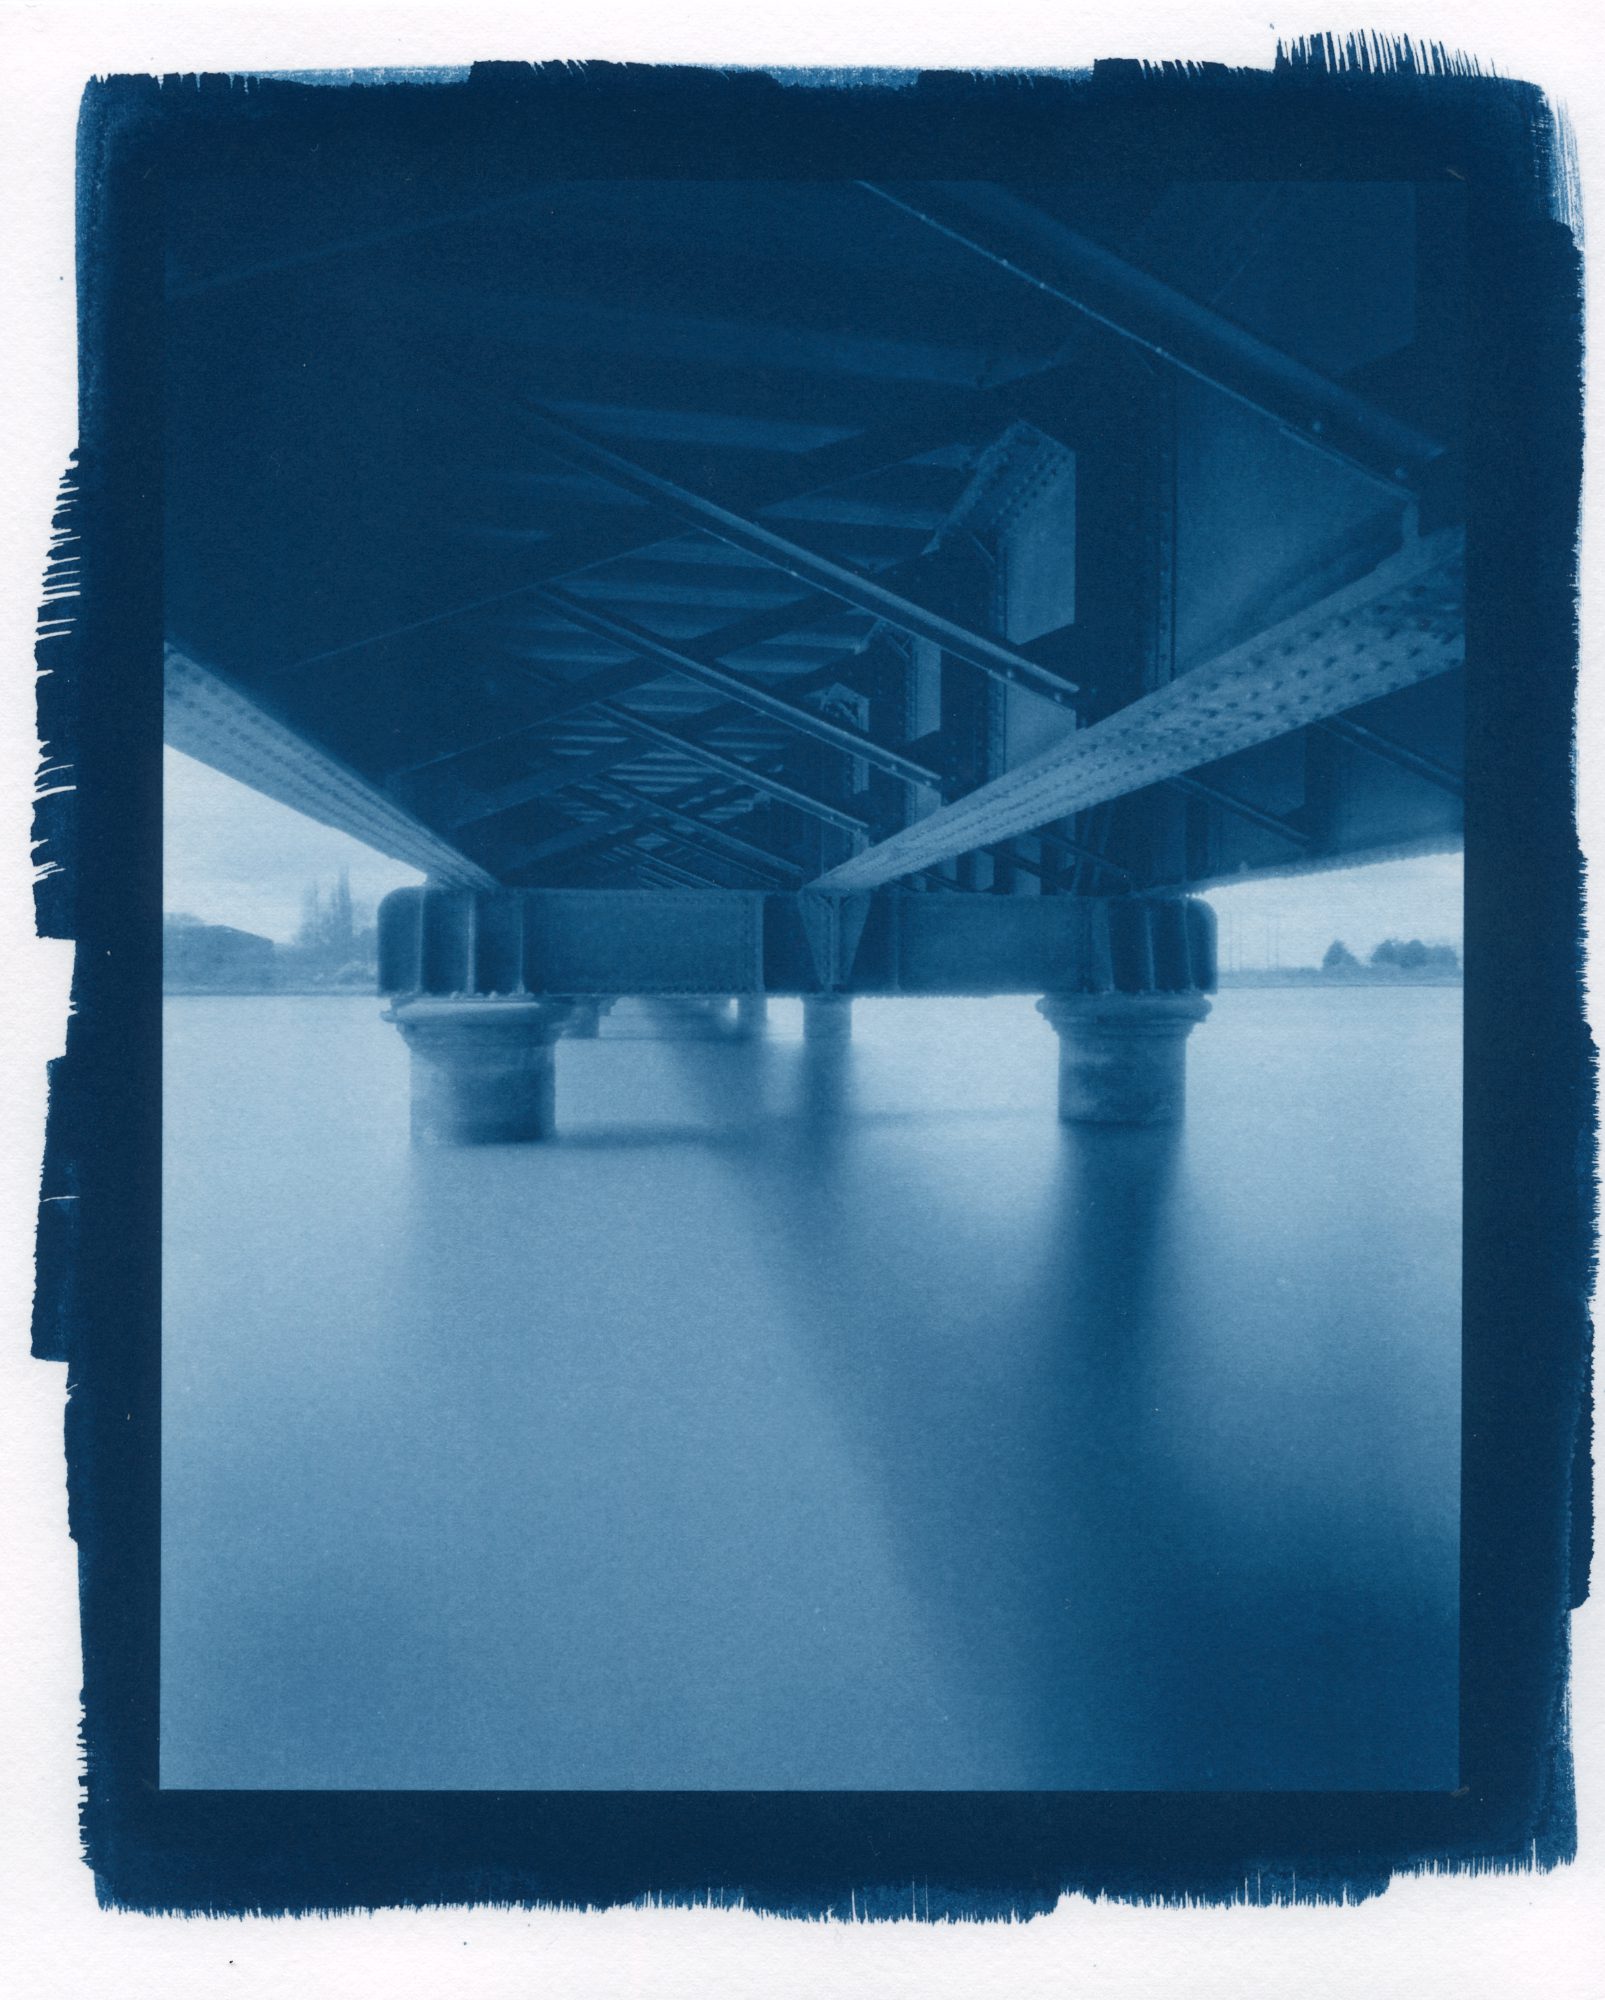  @apkeedle · 1h Replying to @ILFORDPhoto My go at this weeks #ilfordphoto #fridayfavourites #ffpinhole theme. Cyanotype print of a 4x5 pinhole negative made using my favourite film stock: FP4Plus... Smiling face with heart-shaped eyes